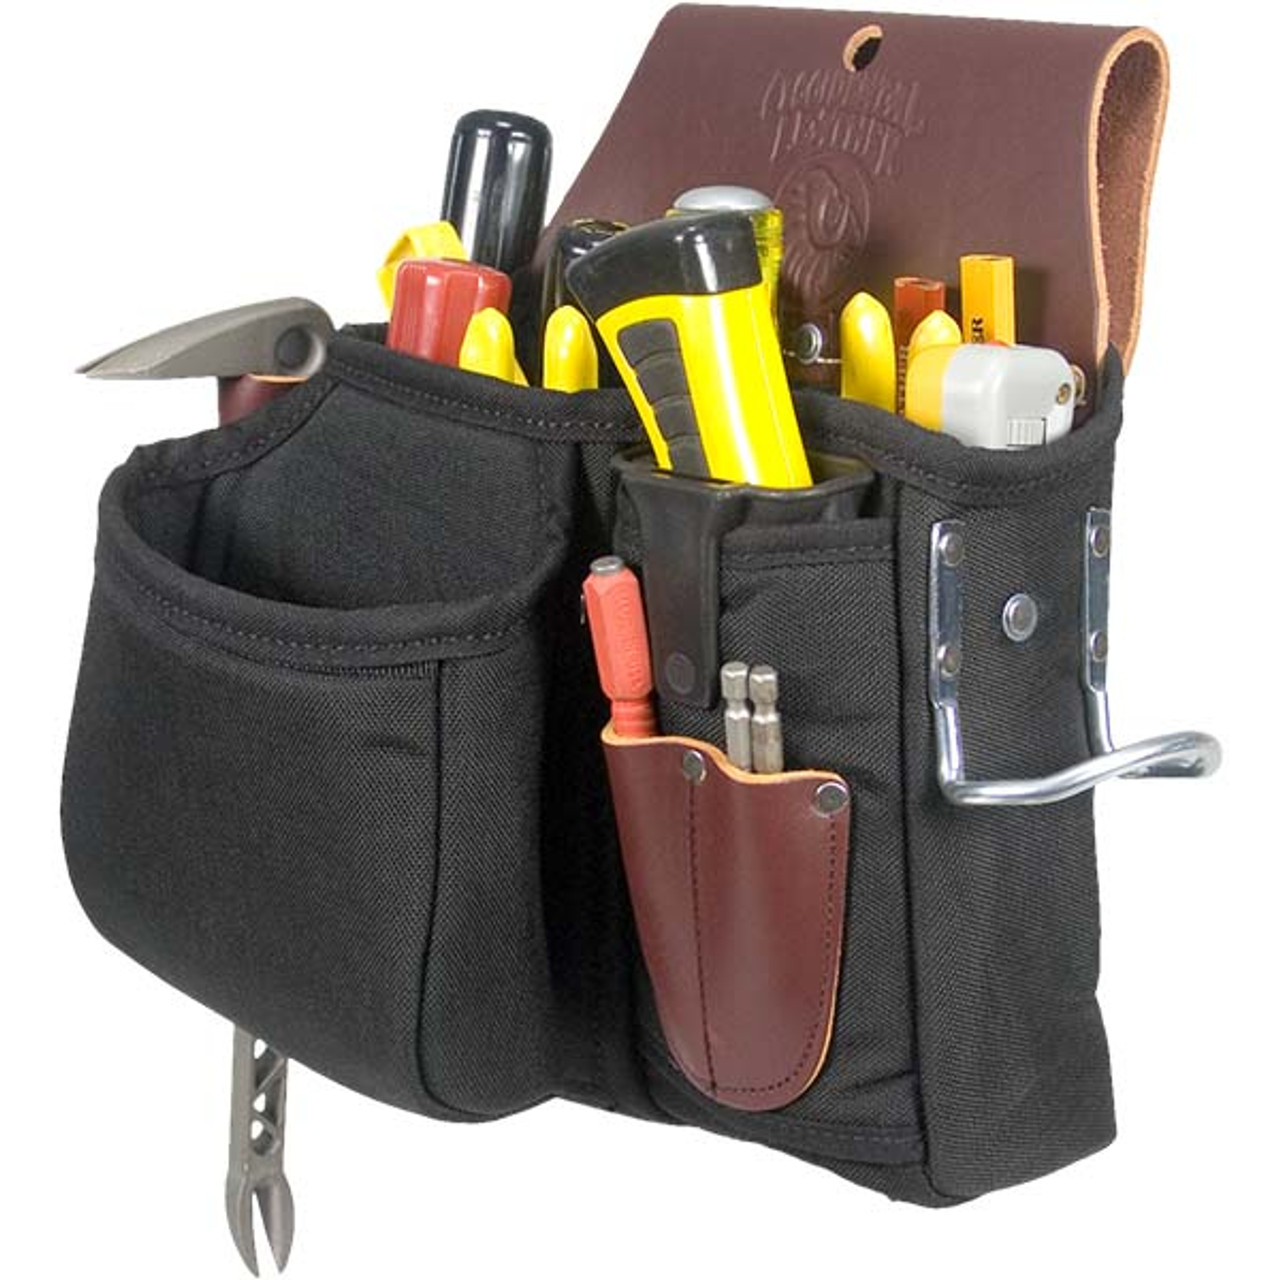 Occidental Leather 9085 - STRONGHOLD TOOL CASE Leather & Nylon